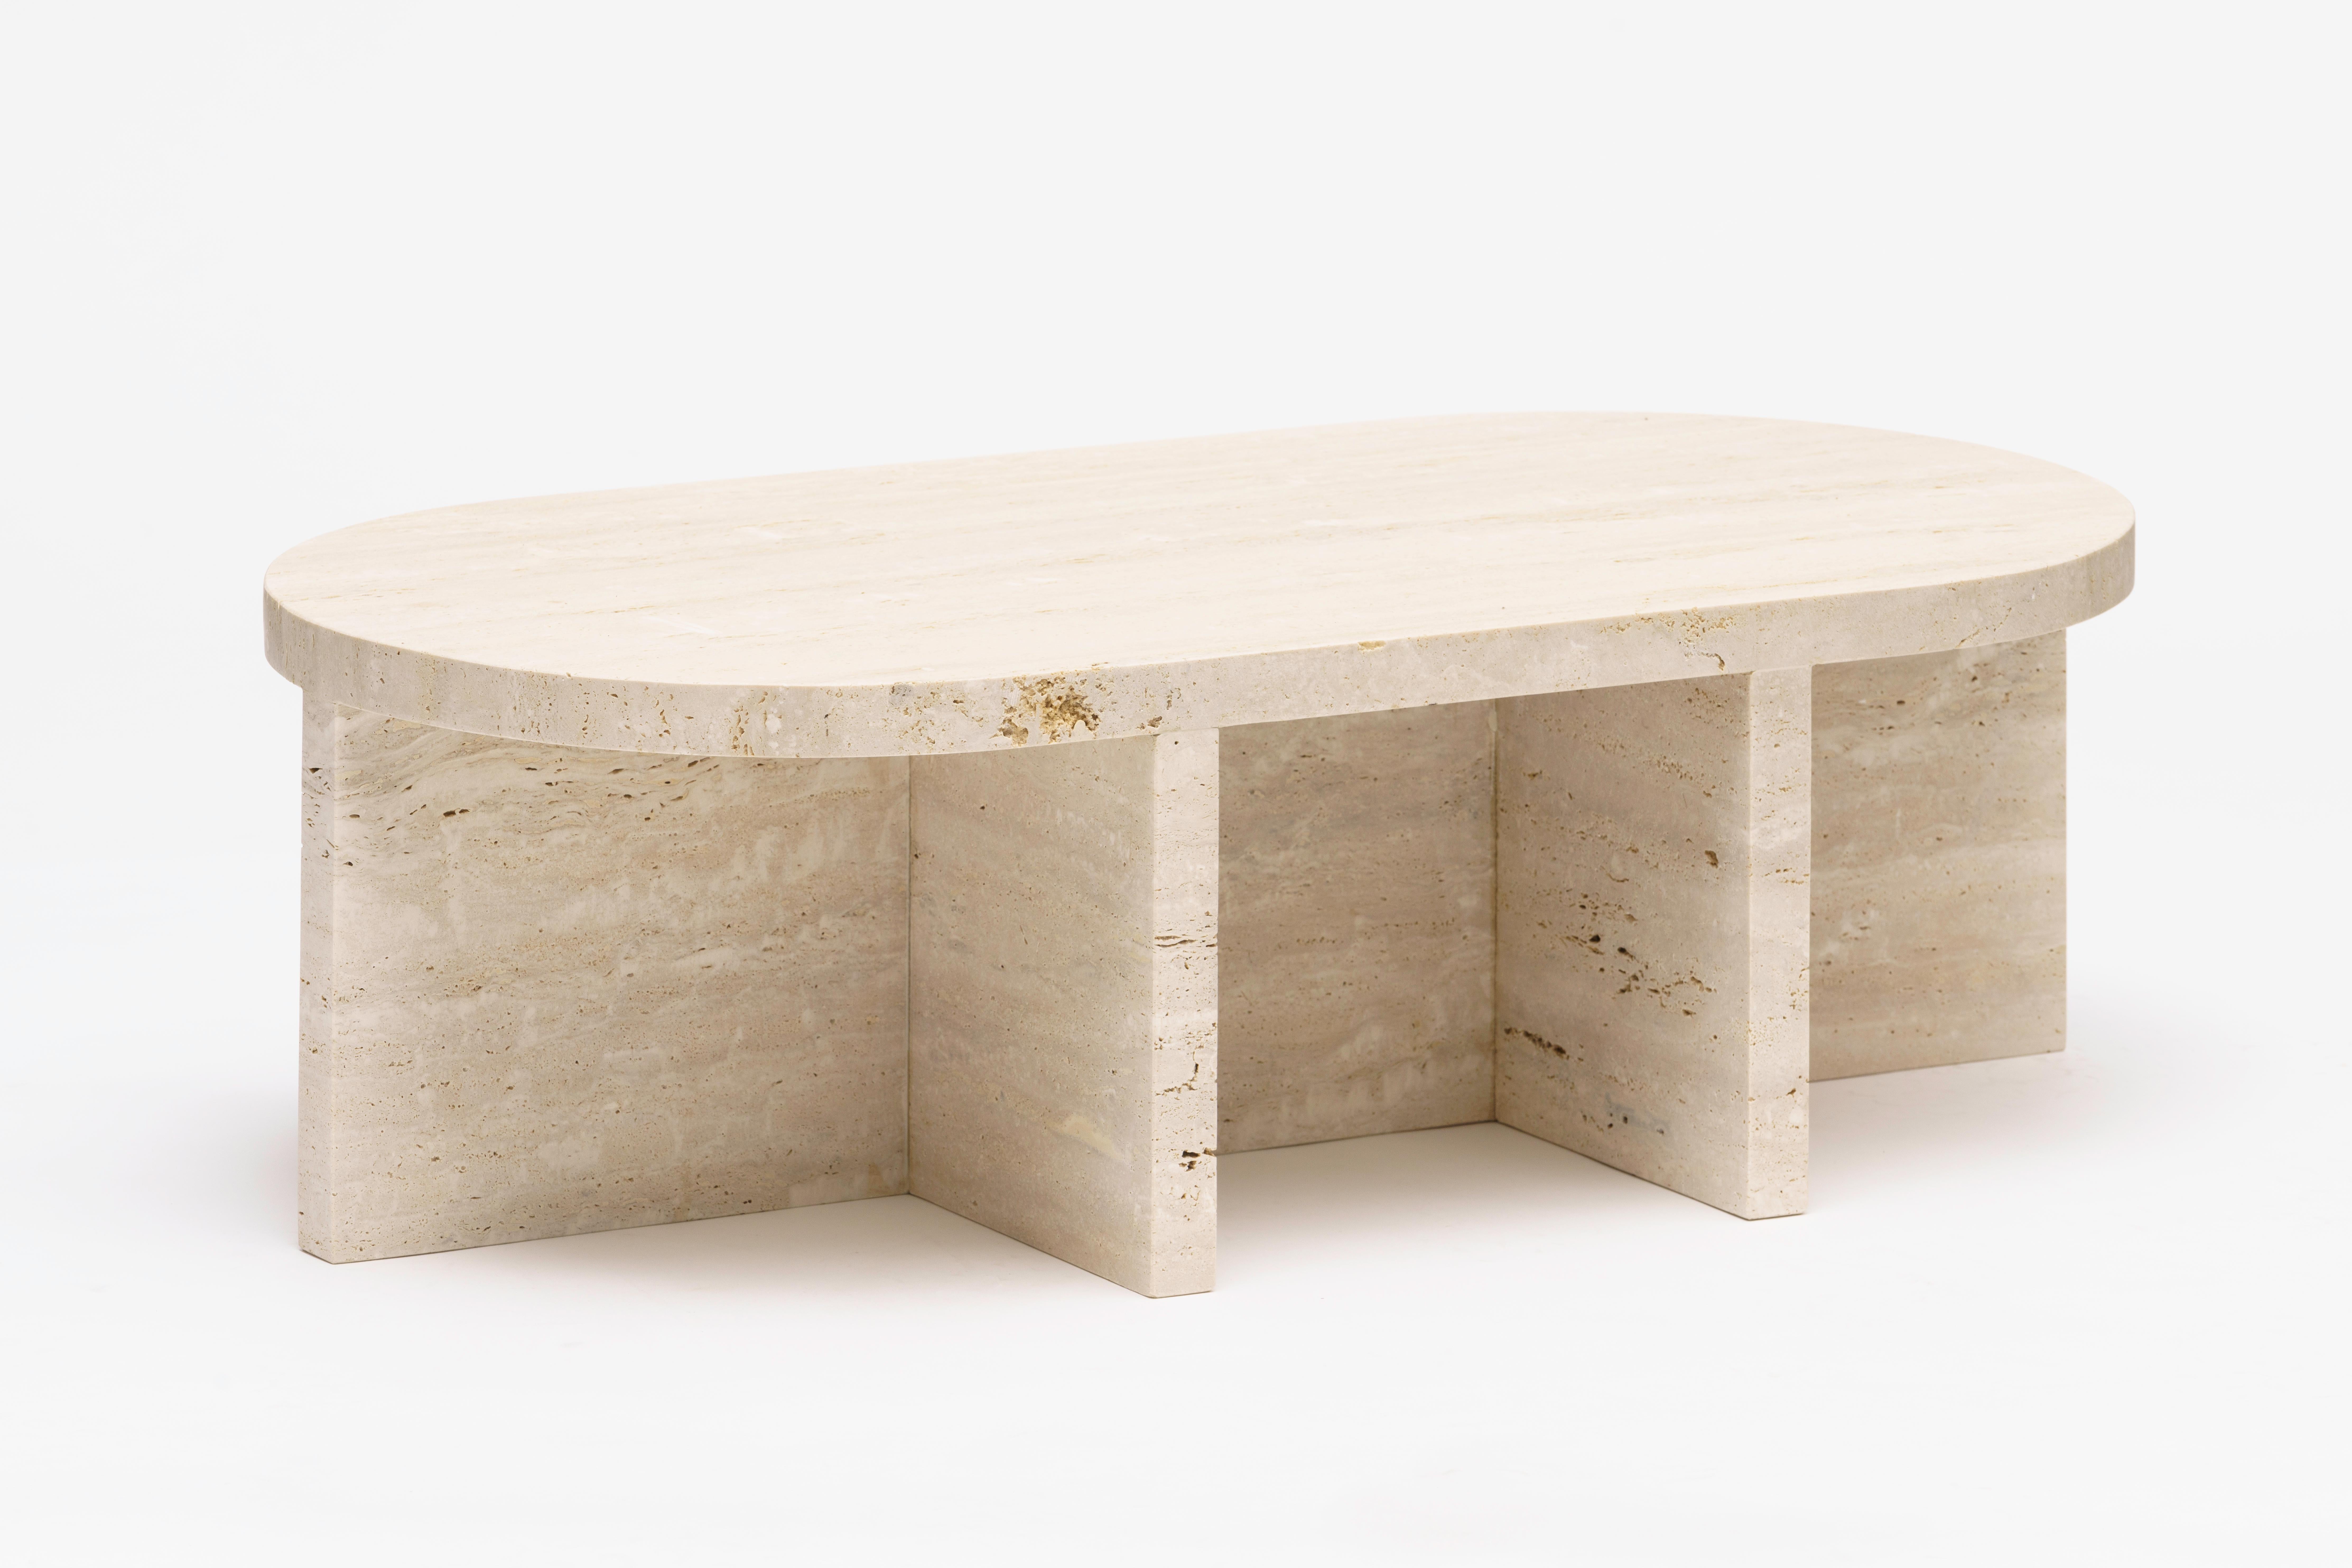 NMTR coffee table by NM3
Dimensions: W 40 x D 80 x H 25 cm
Materials: travertine

30mm travertine coffe table.

NM3 is an office for architecture and design based in Milan run by Nicolò Ornaghi, Delfino Sisto Legnani and Francesco Zorzi.
NM3